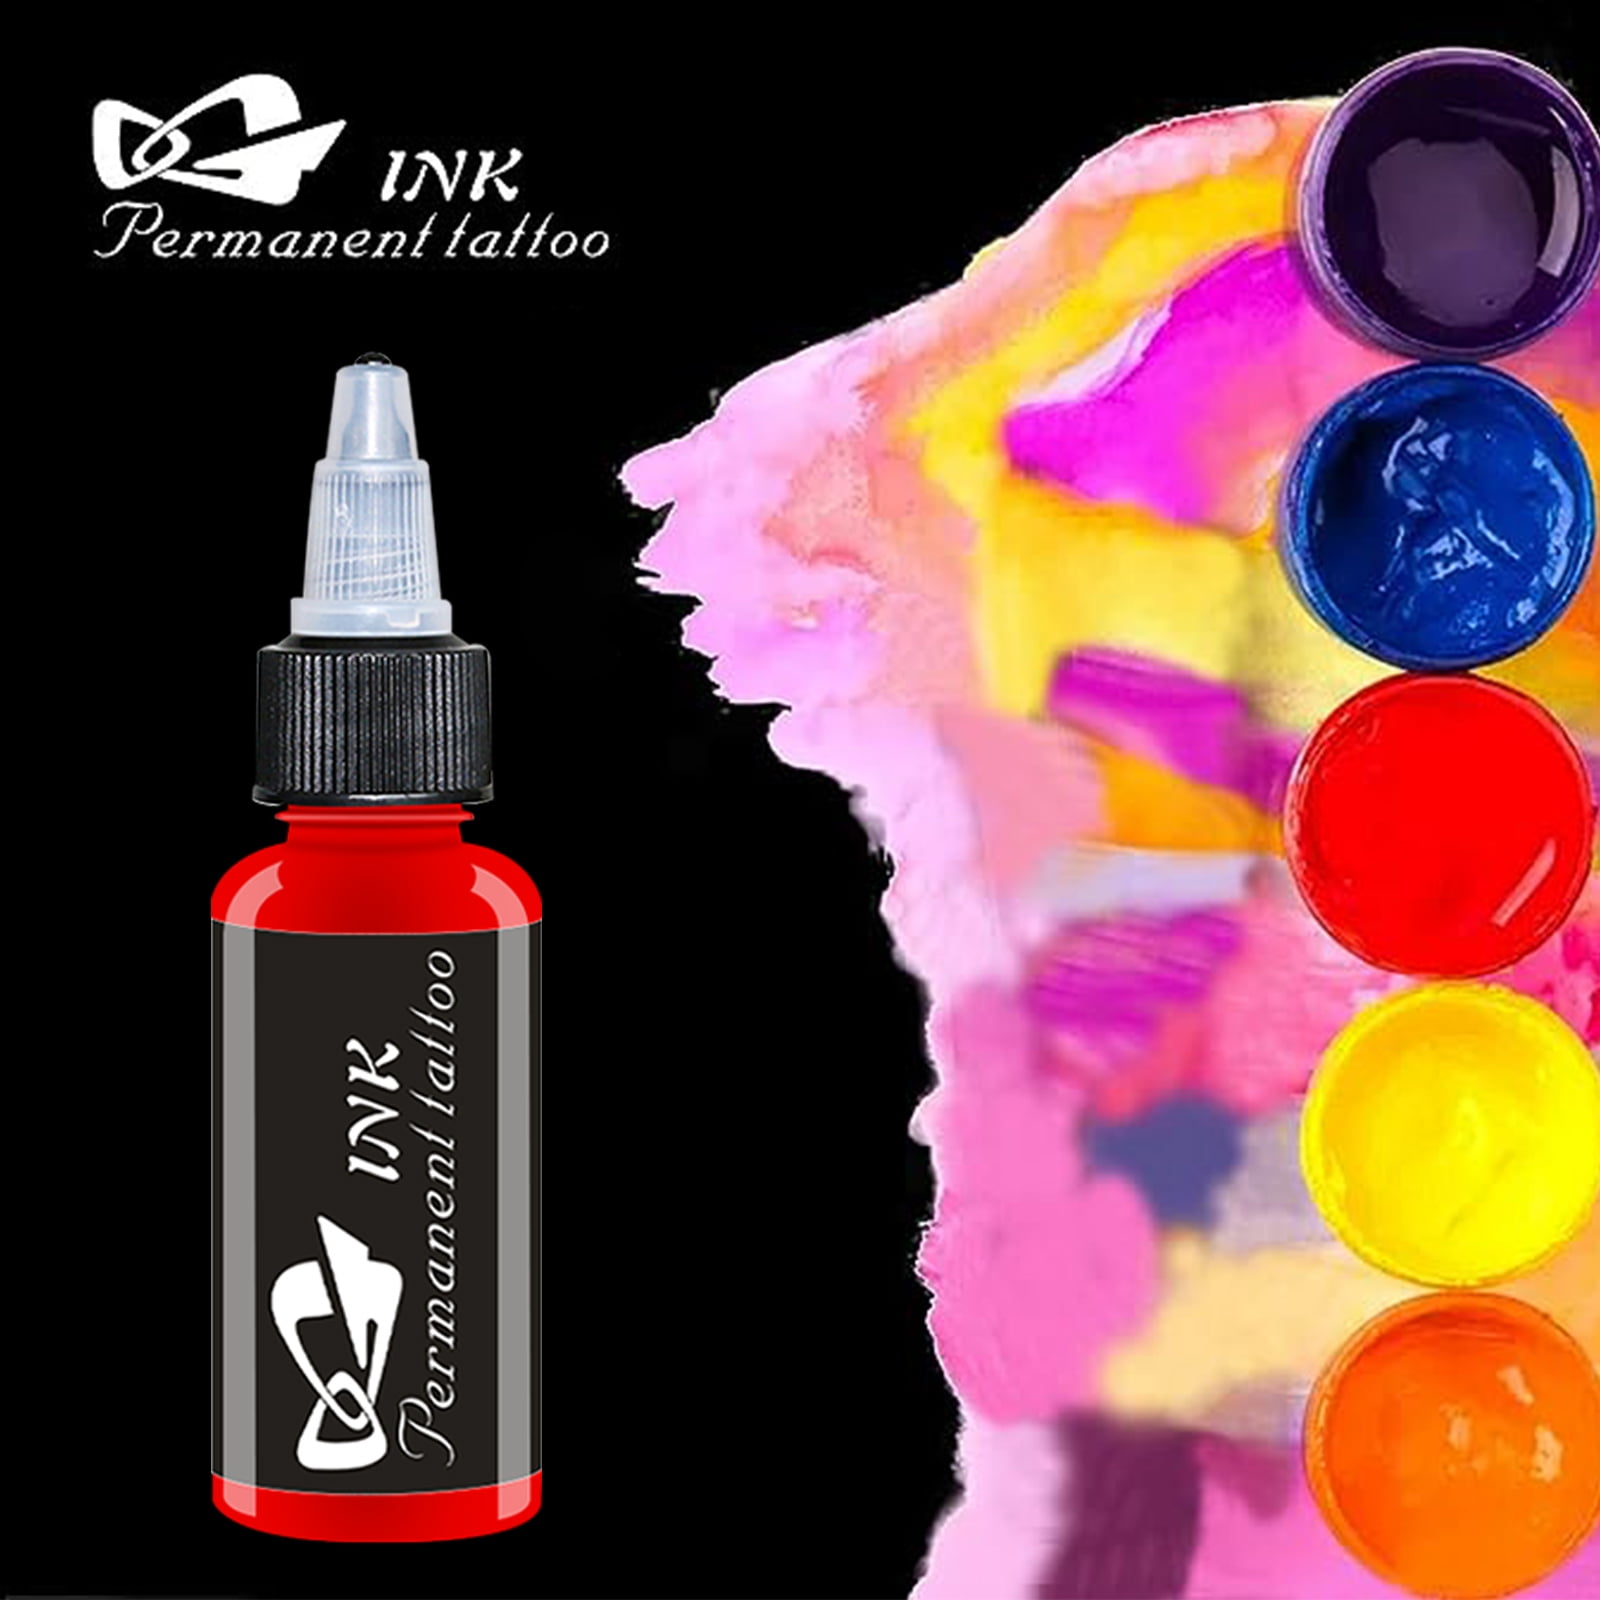 14Color/set 8ml/bottle Brand Professional Tattoo Ink Kits For Body